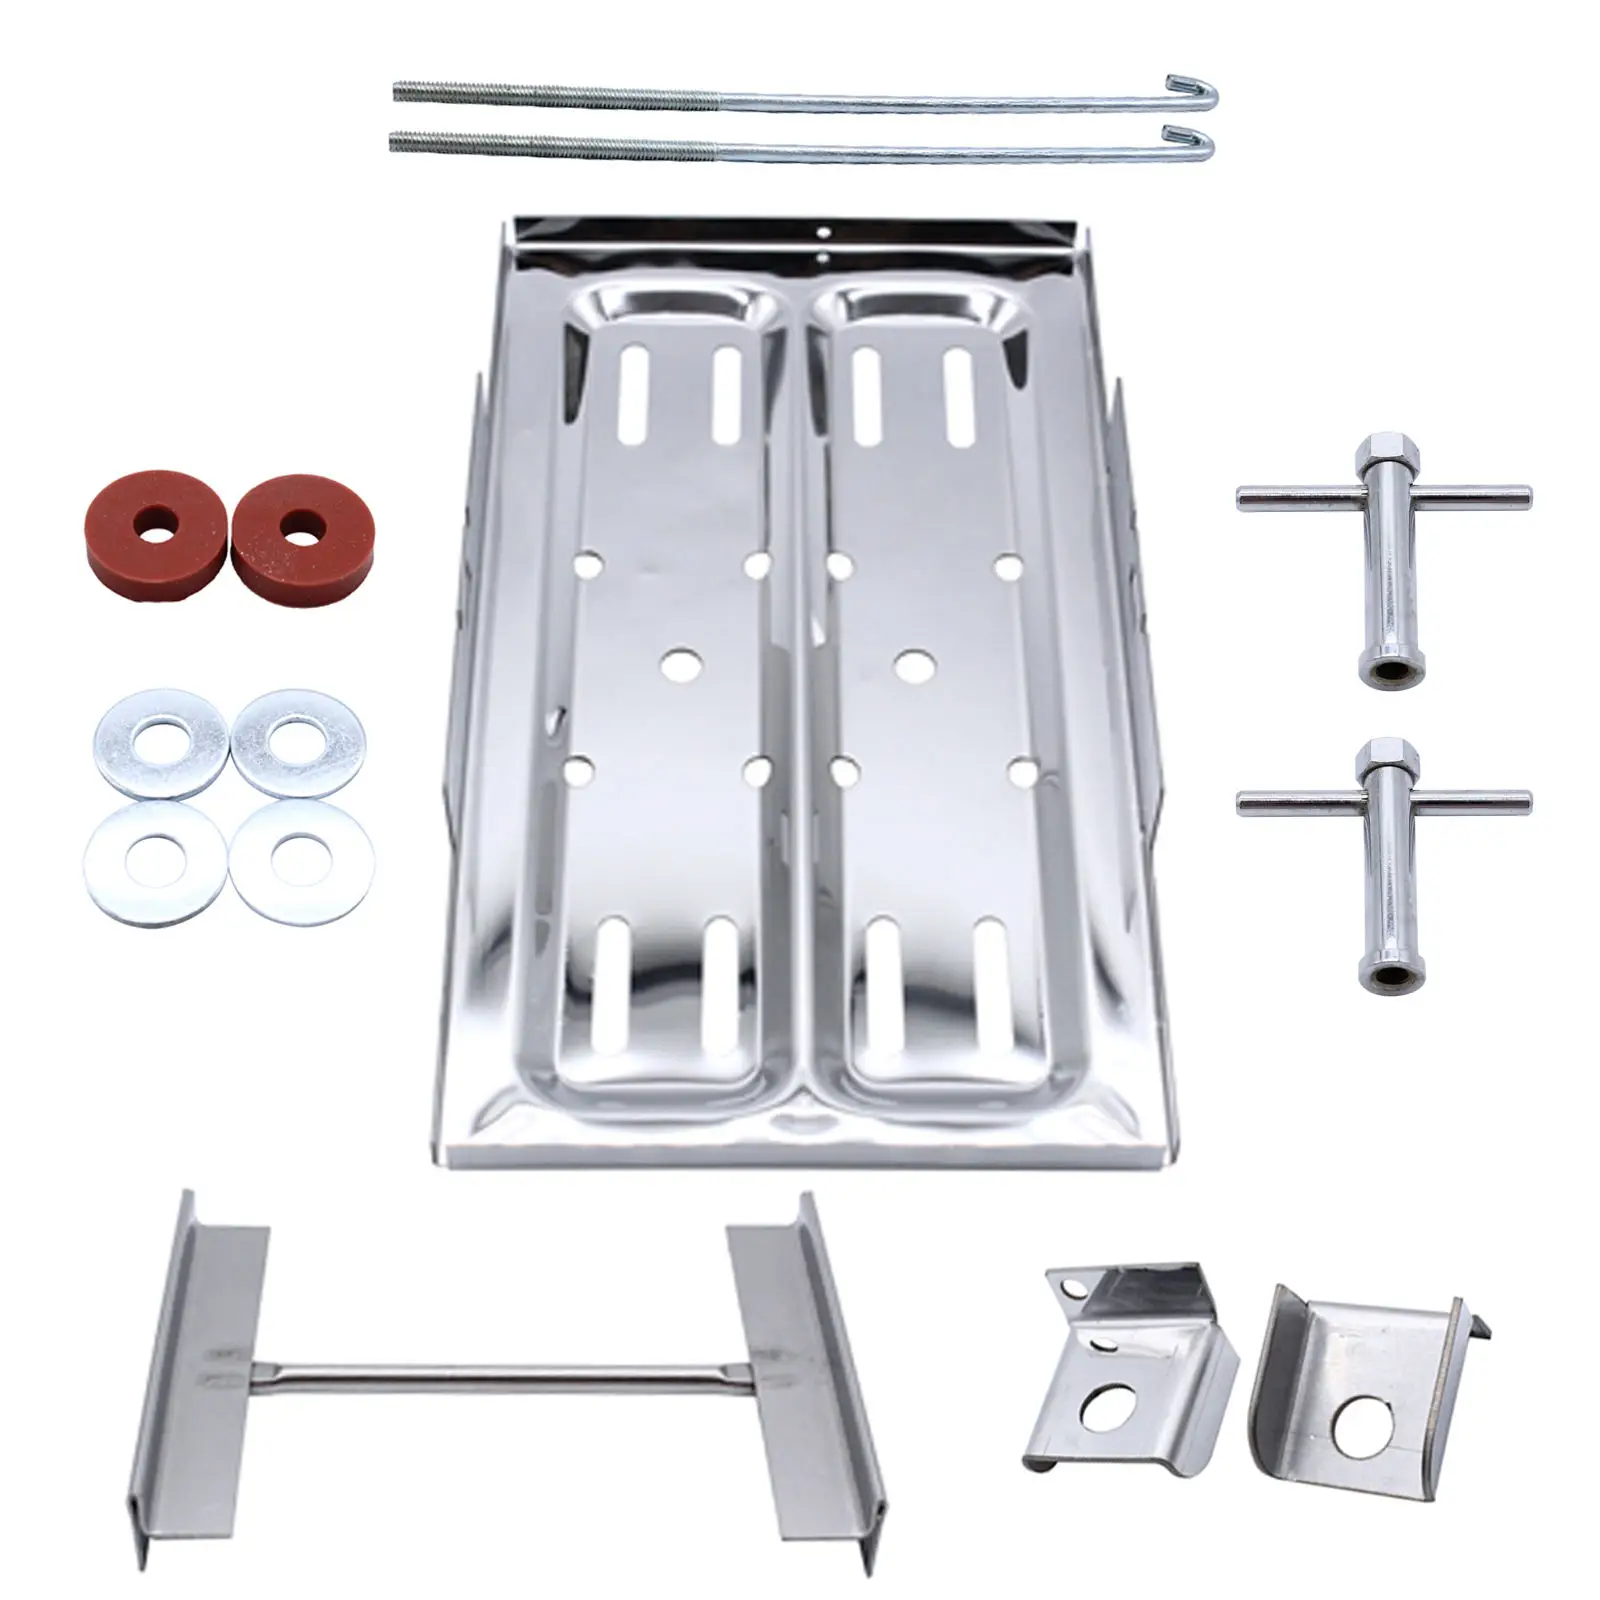 Battery Tray Kit Stainless Steel Hold Down Clamp Bracket Car Accessories